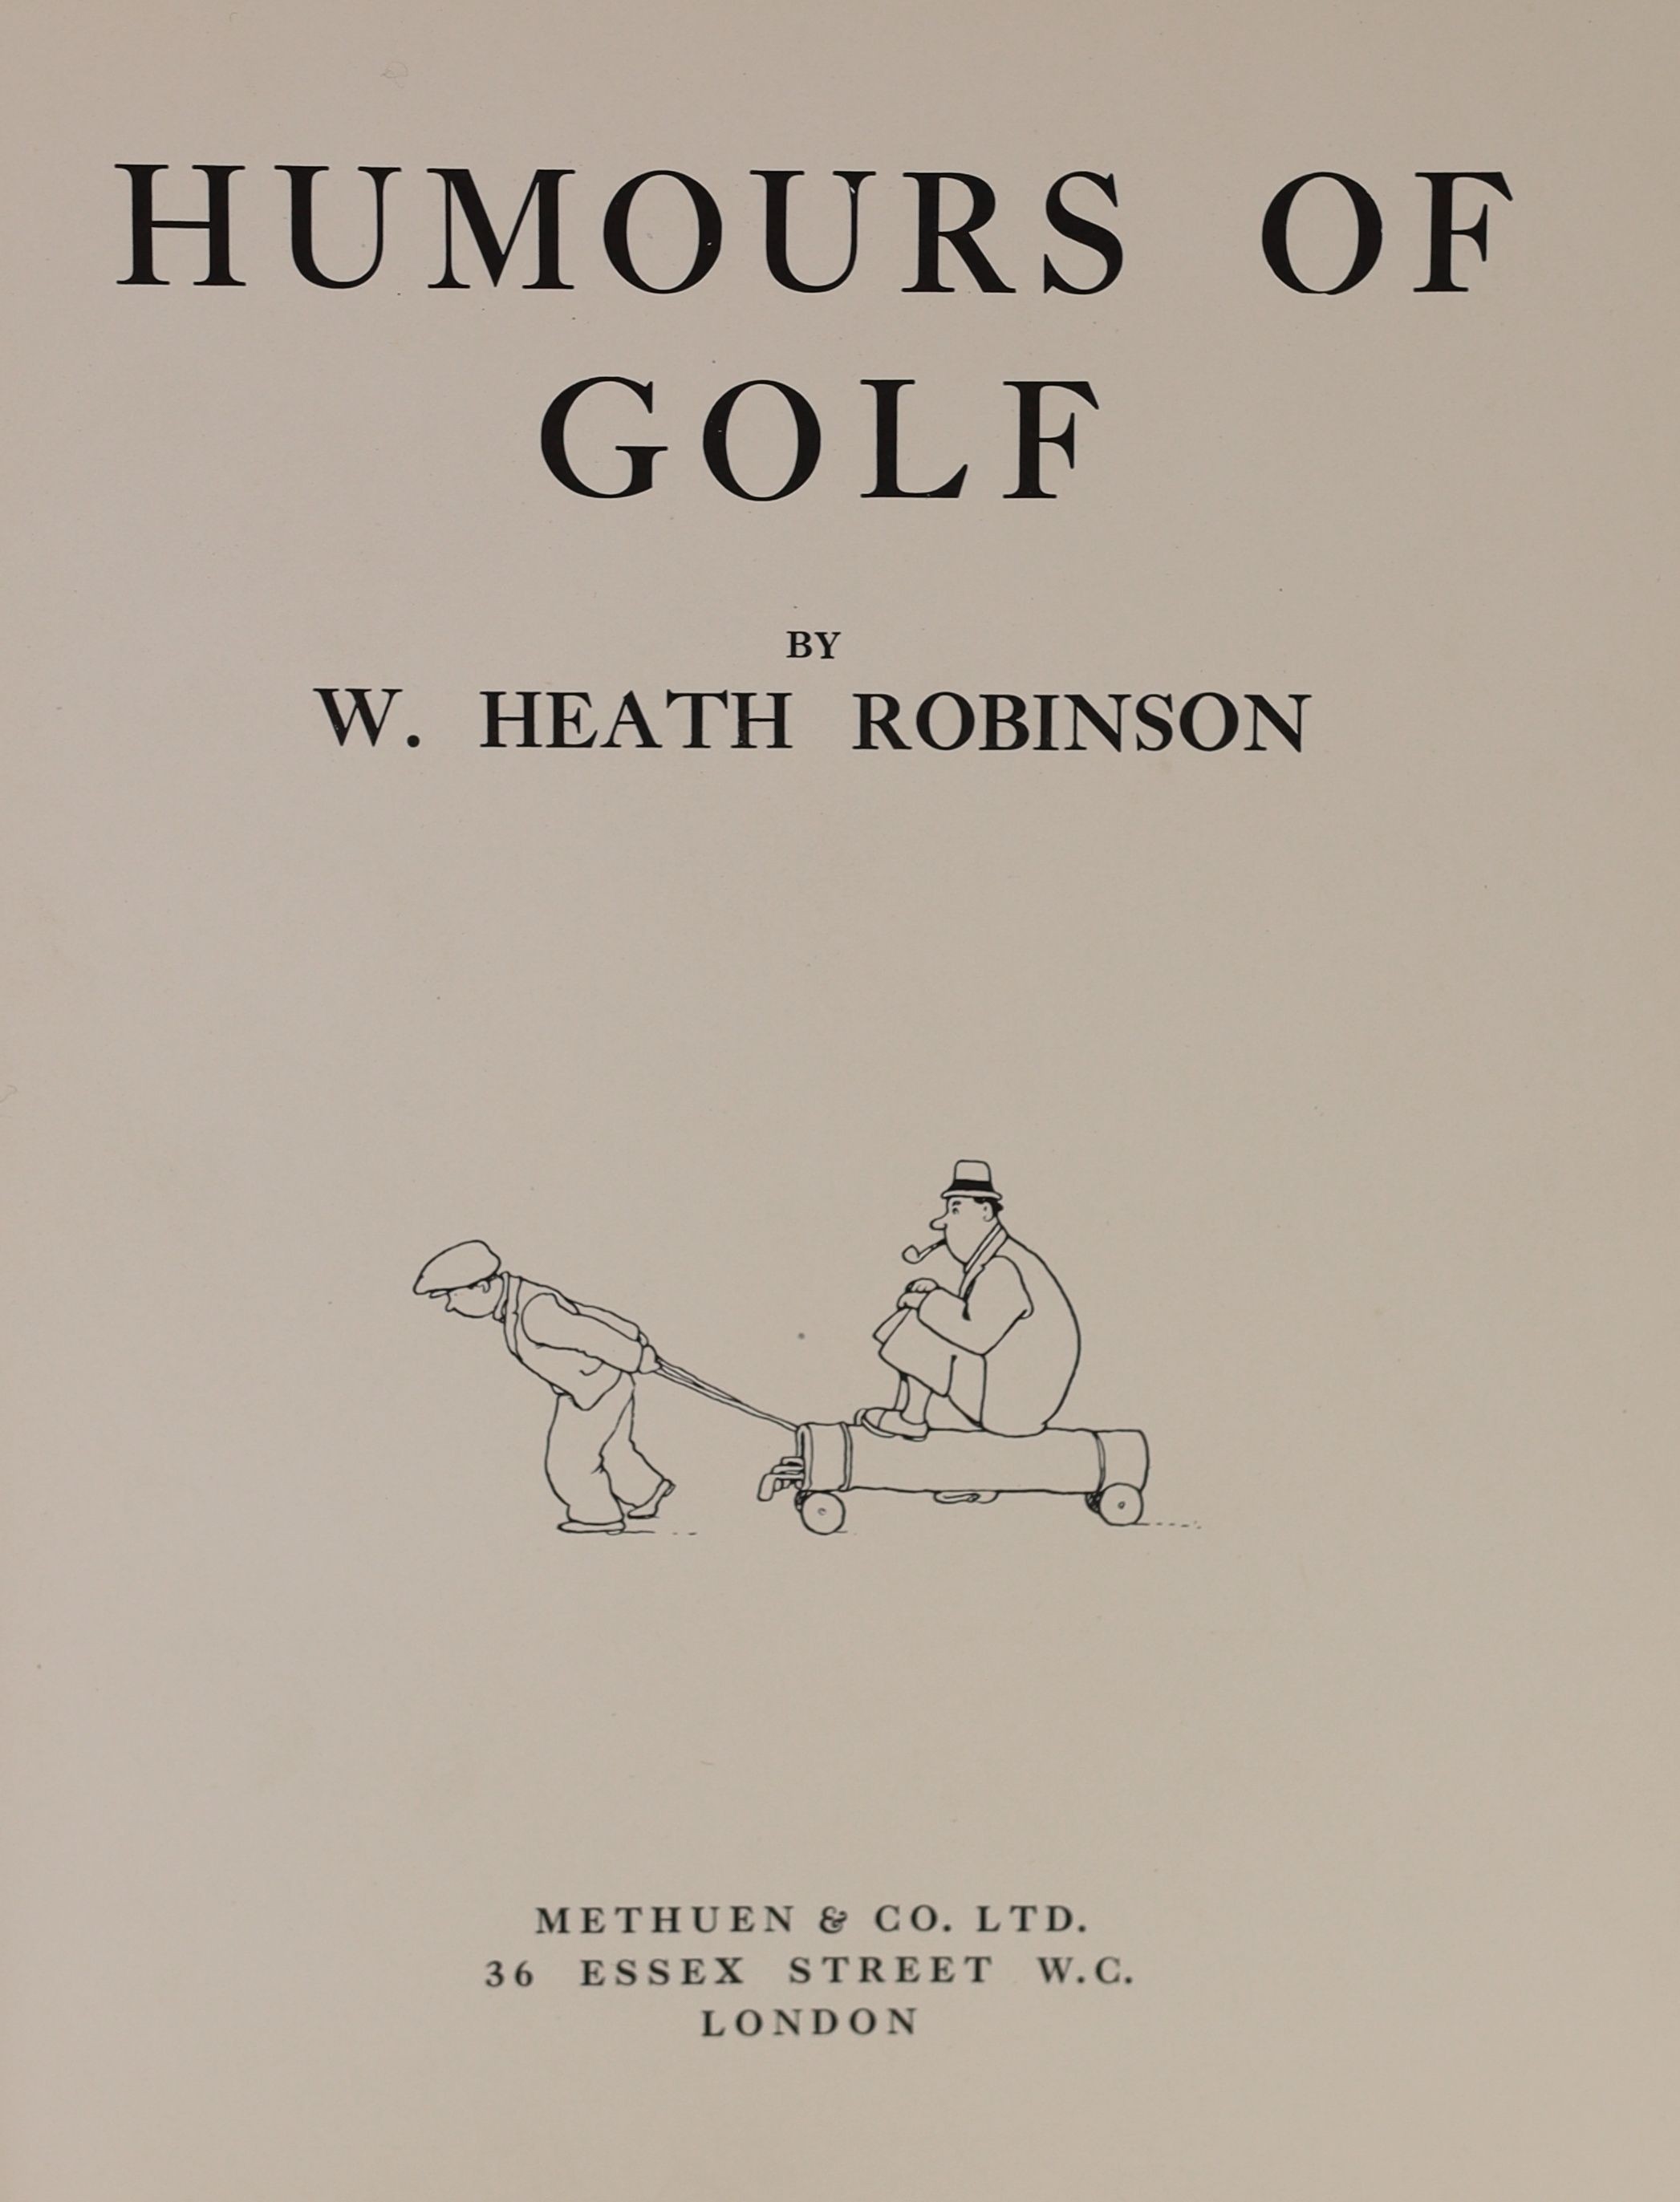 Robinson, W. Heath - Humour of Golf, 1st edition, 4to, original pictorial boards, with 50 illustrations, Methuen & Co., London, 1923